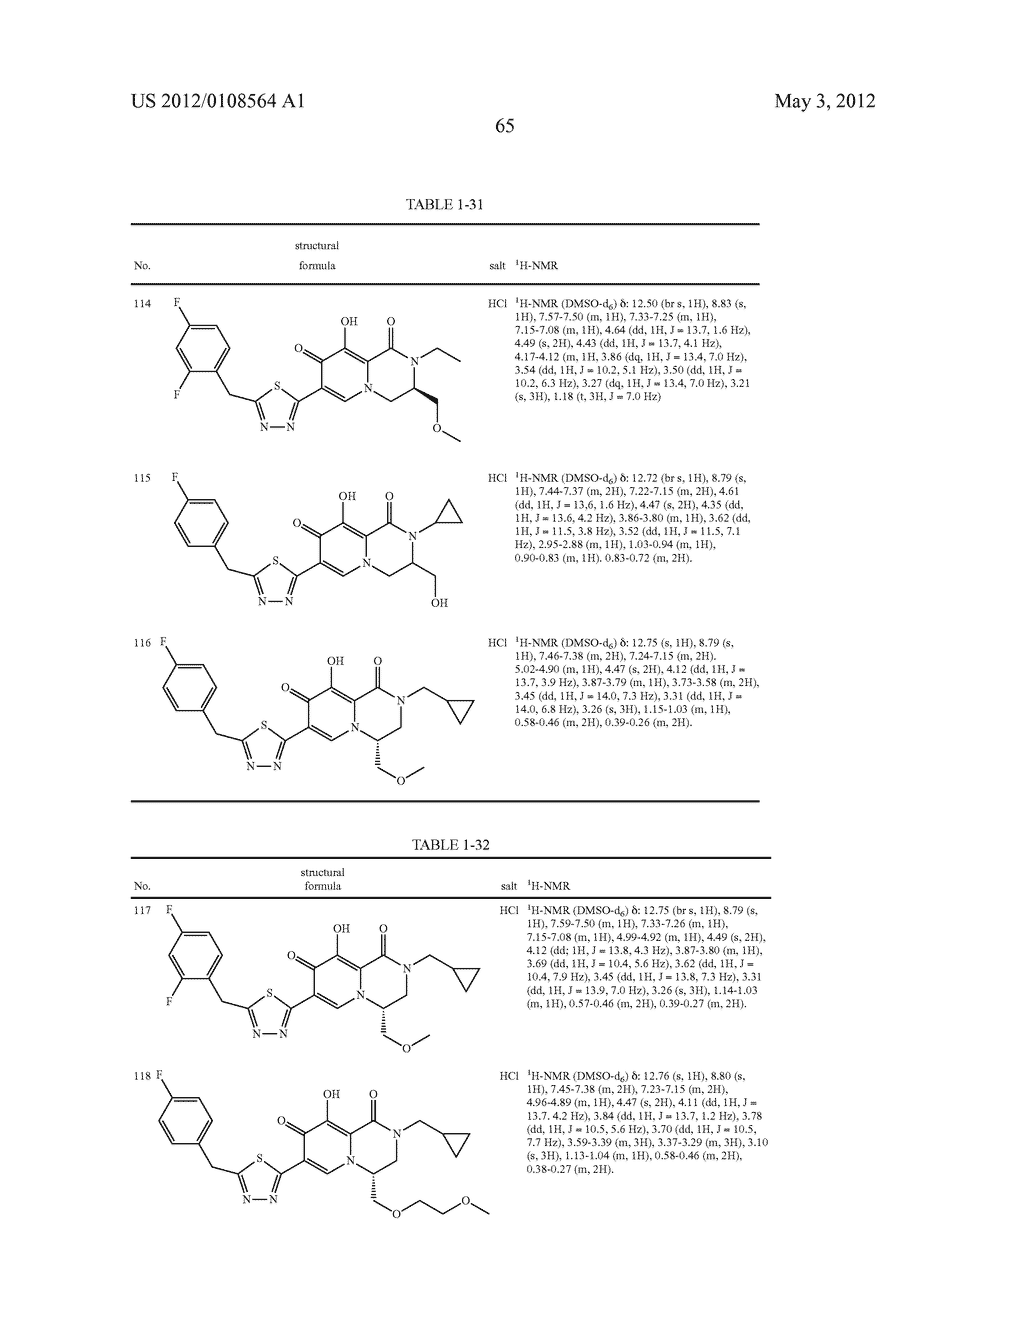 1,3,4,8-Tetrahydro-2H-Pyrido[1,2-a]Pyradine Derivatives and Use Thereof as     HIV Integrase Inhibitor - diagram, schematic, and image 66